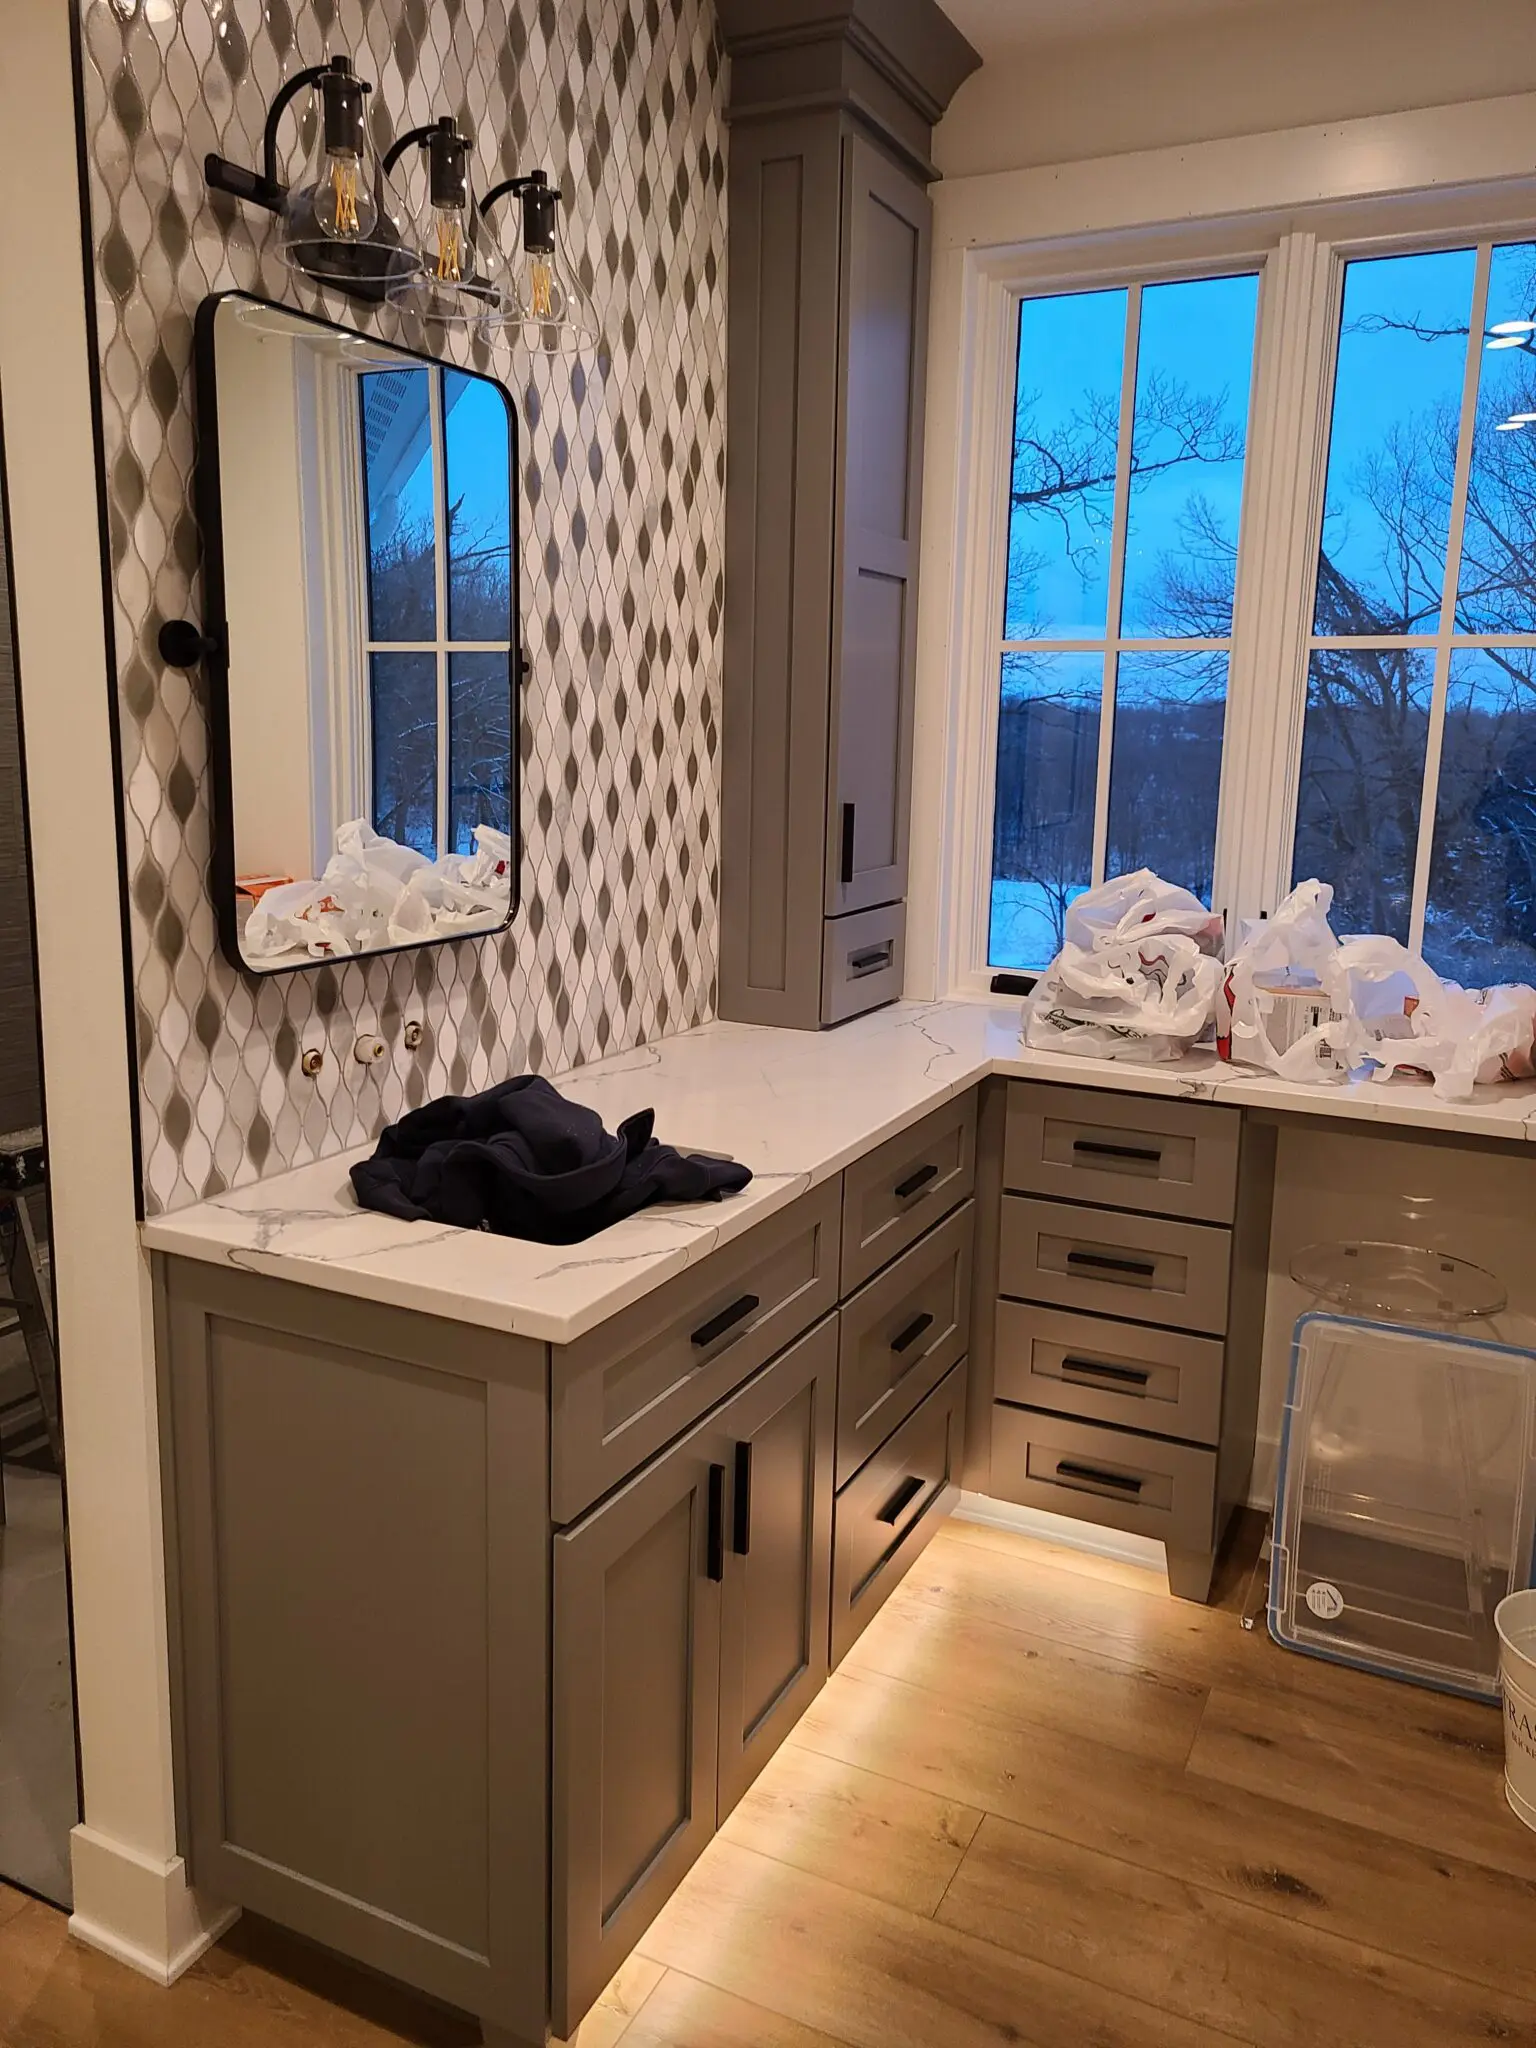 The remodelling of room space with custom cabinets